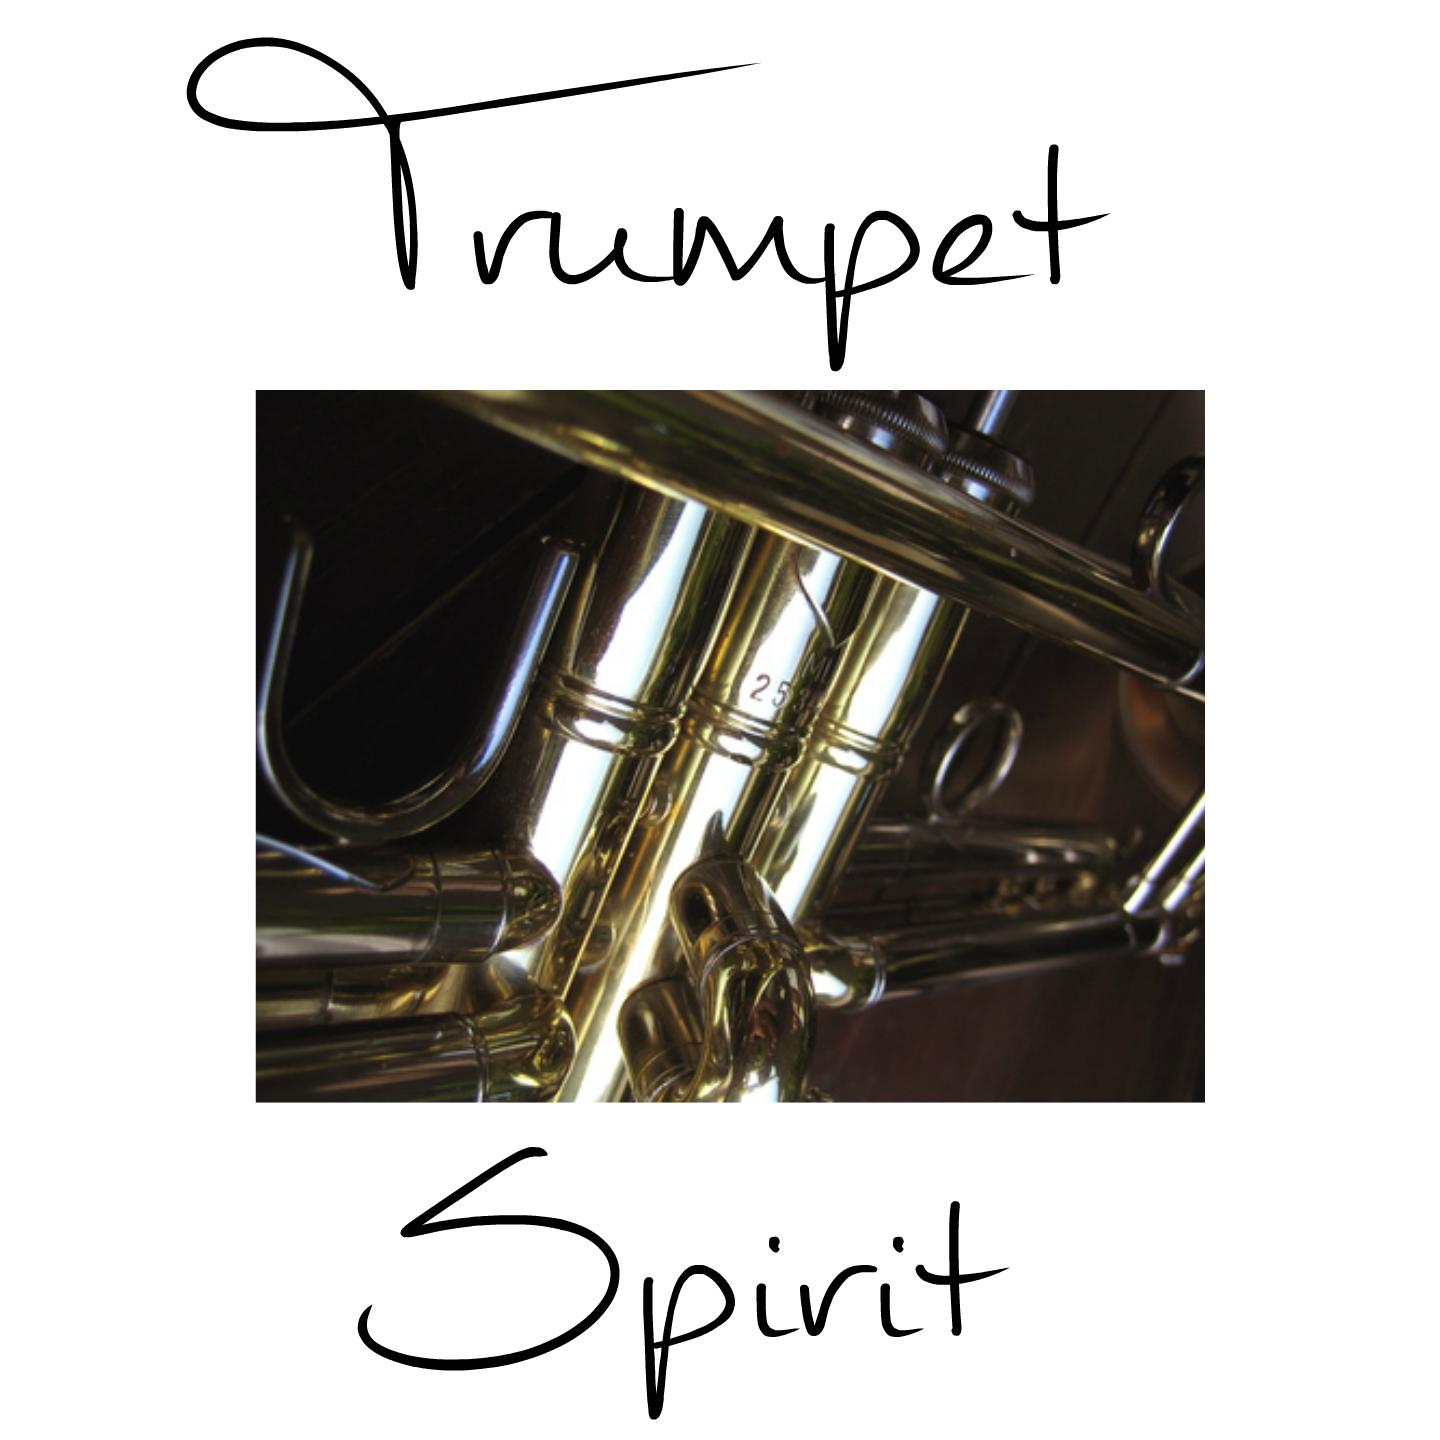 Concerto for Trumpet, Brass Ensemble and Percussion: III. Allegro